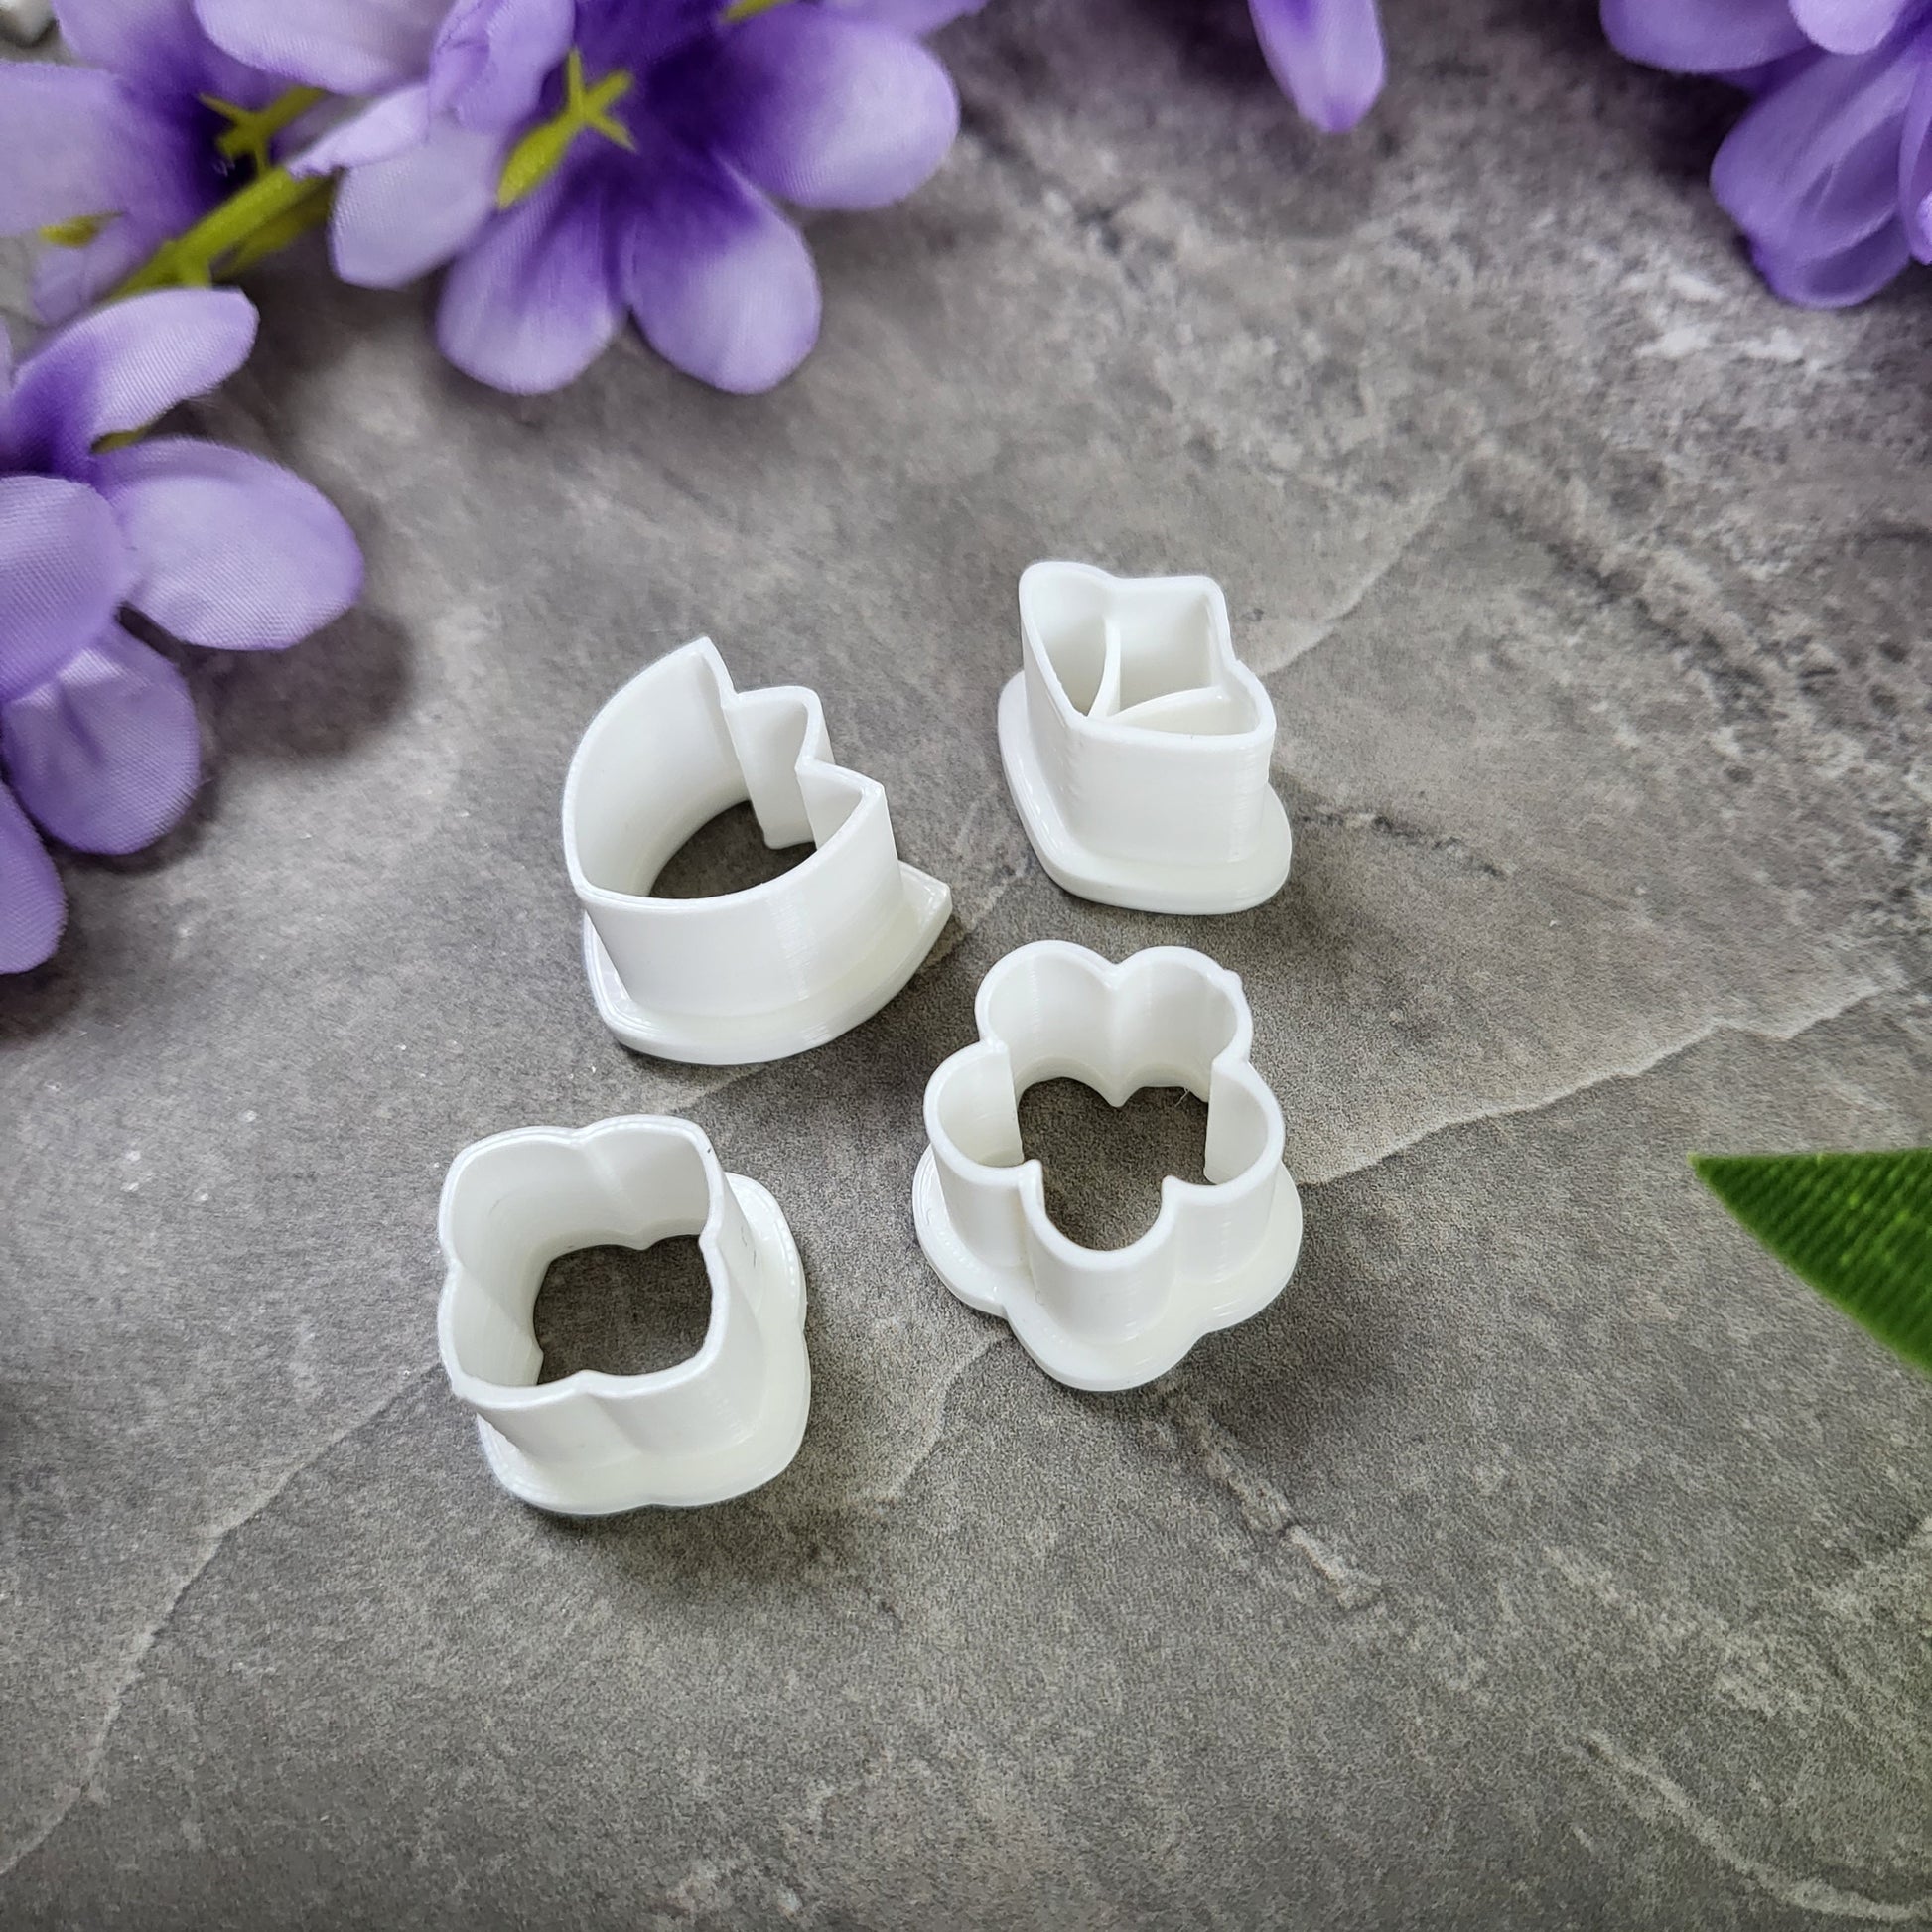 Floral Stud Clay Cutter, Floral Polymer Clay Cutters, Stud Earrings, Jewelry Making